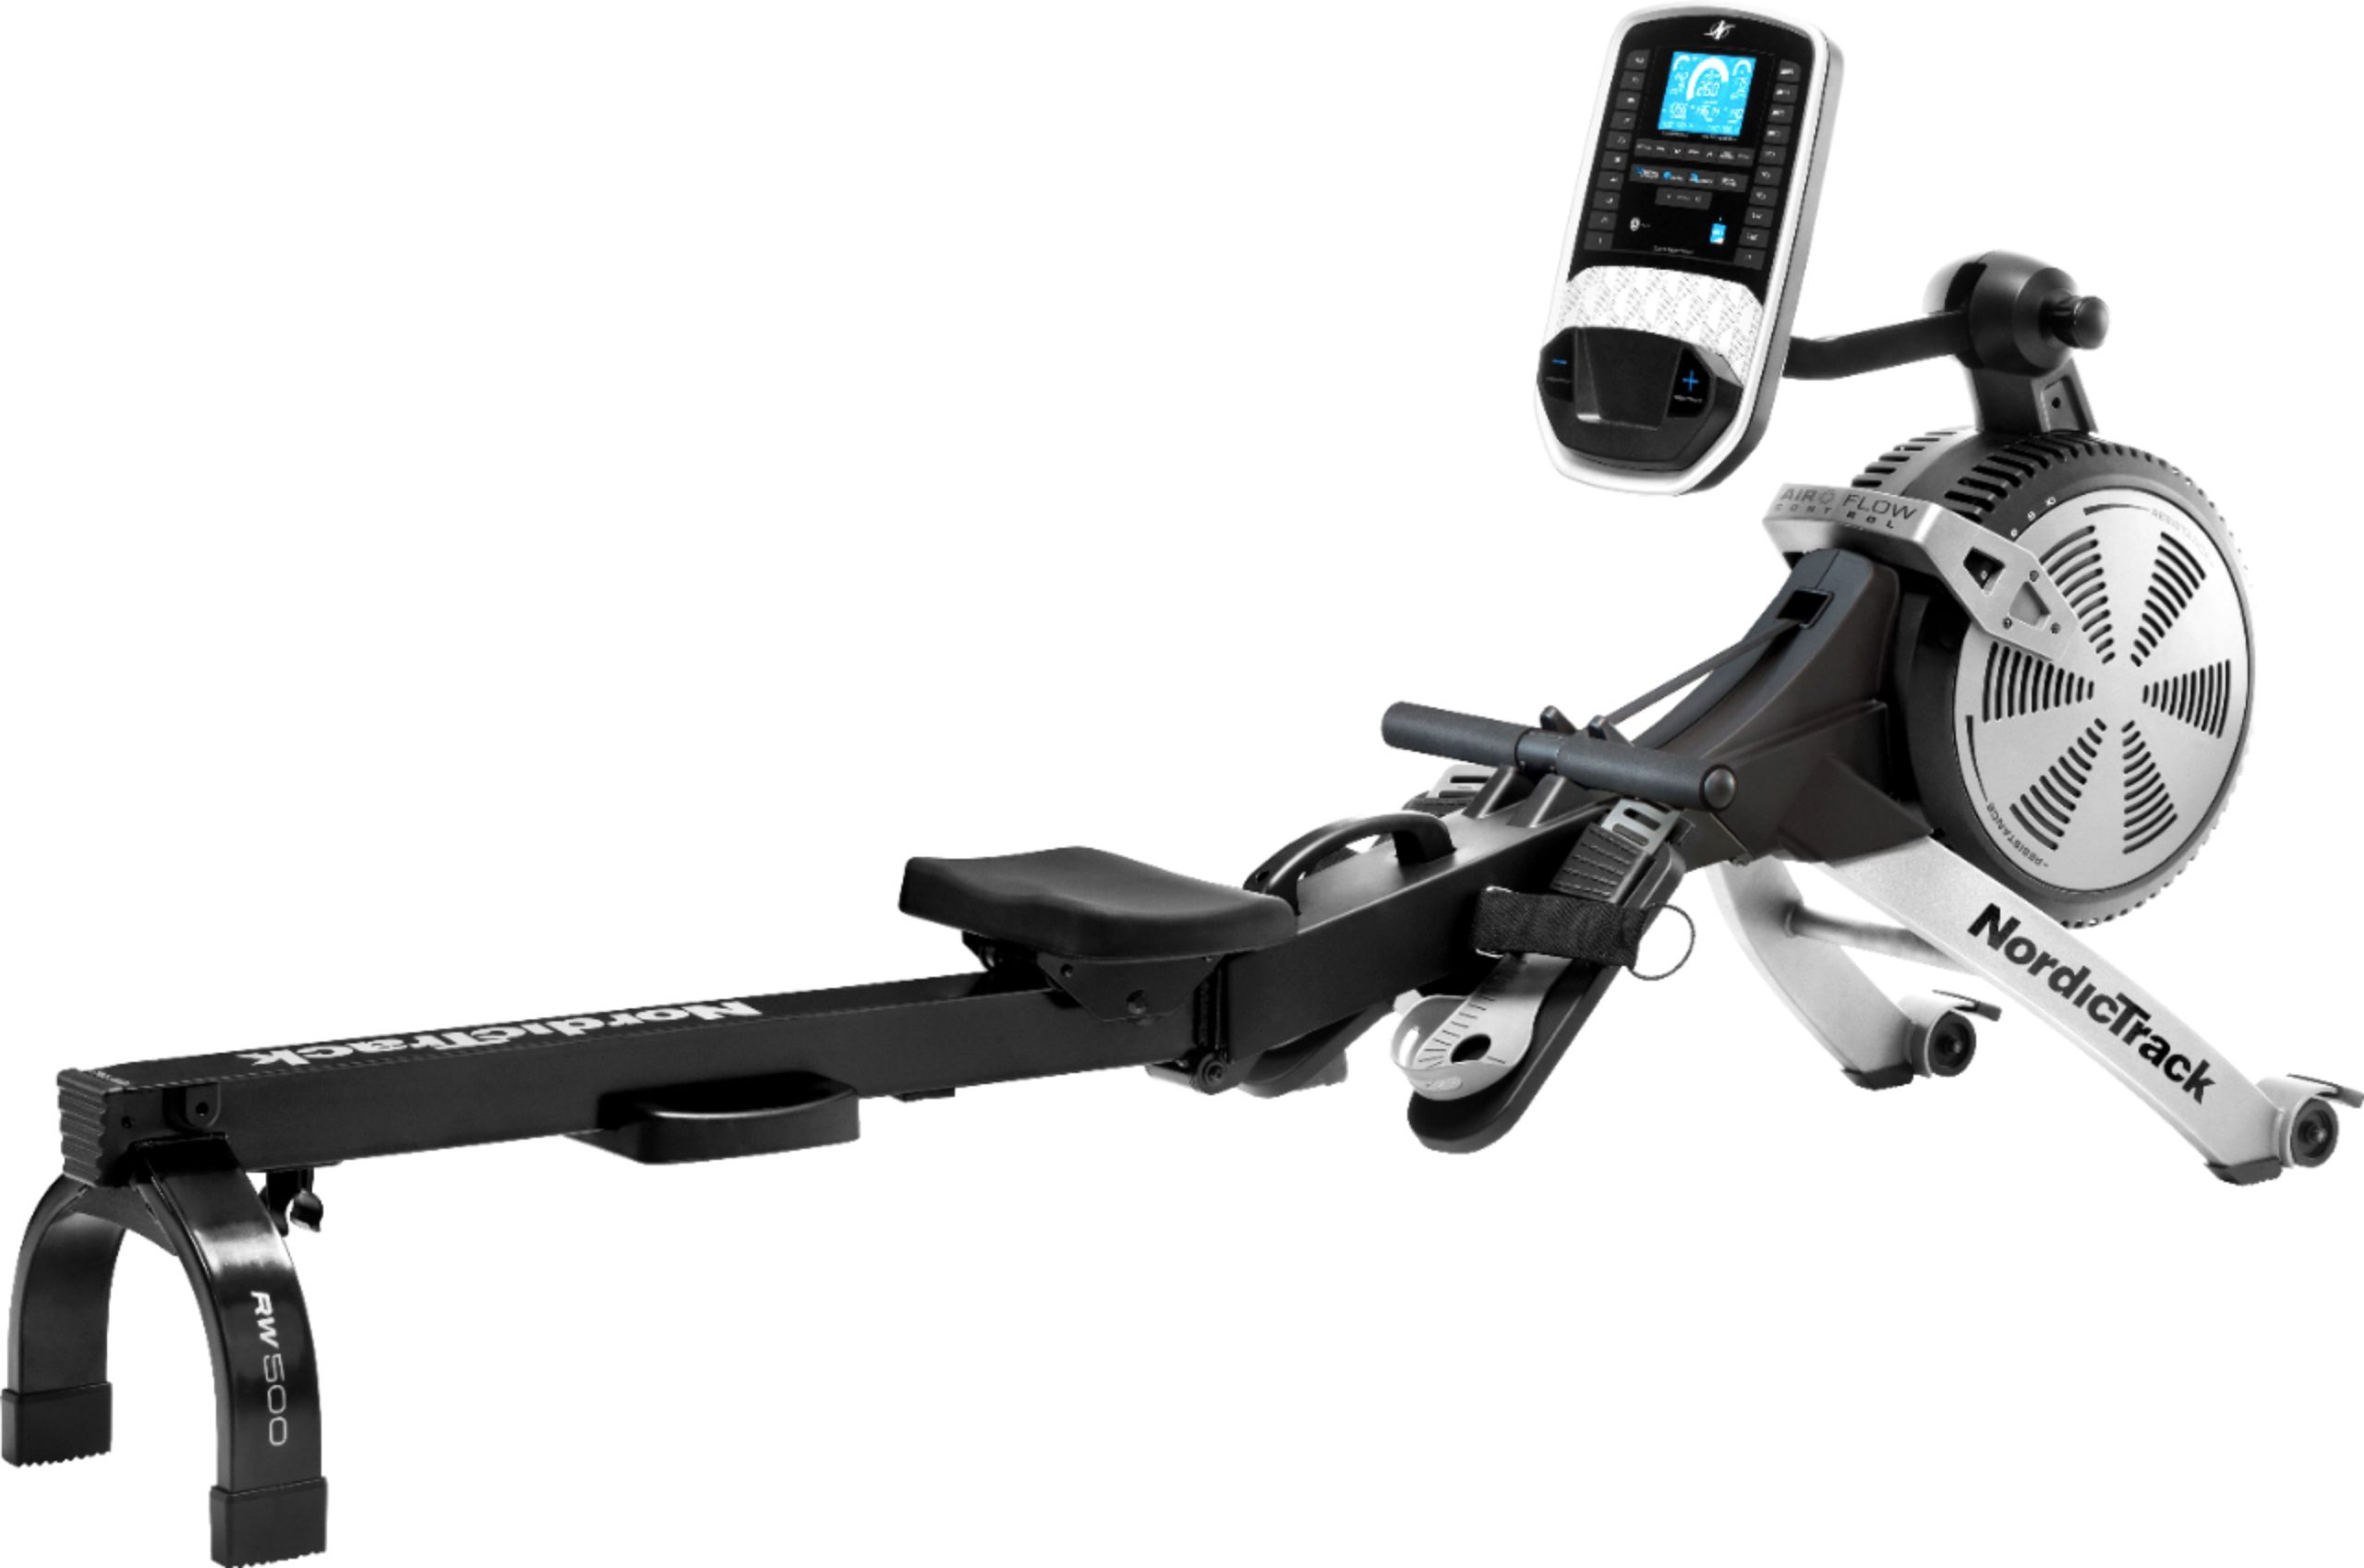 NordicTrack RW500 Rower – Black – Just $699.99 at Best Buy